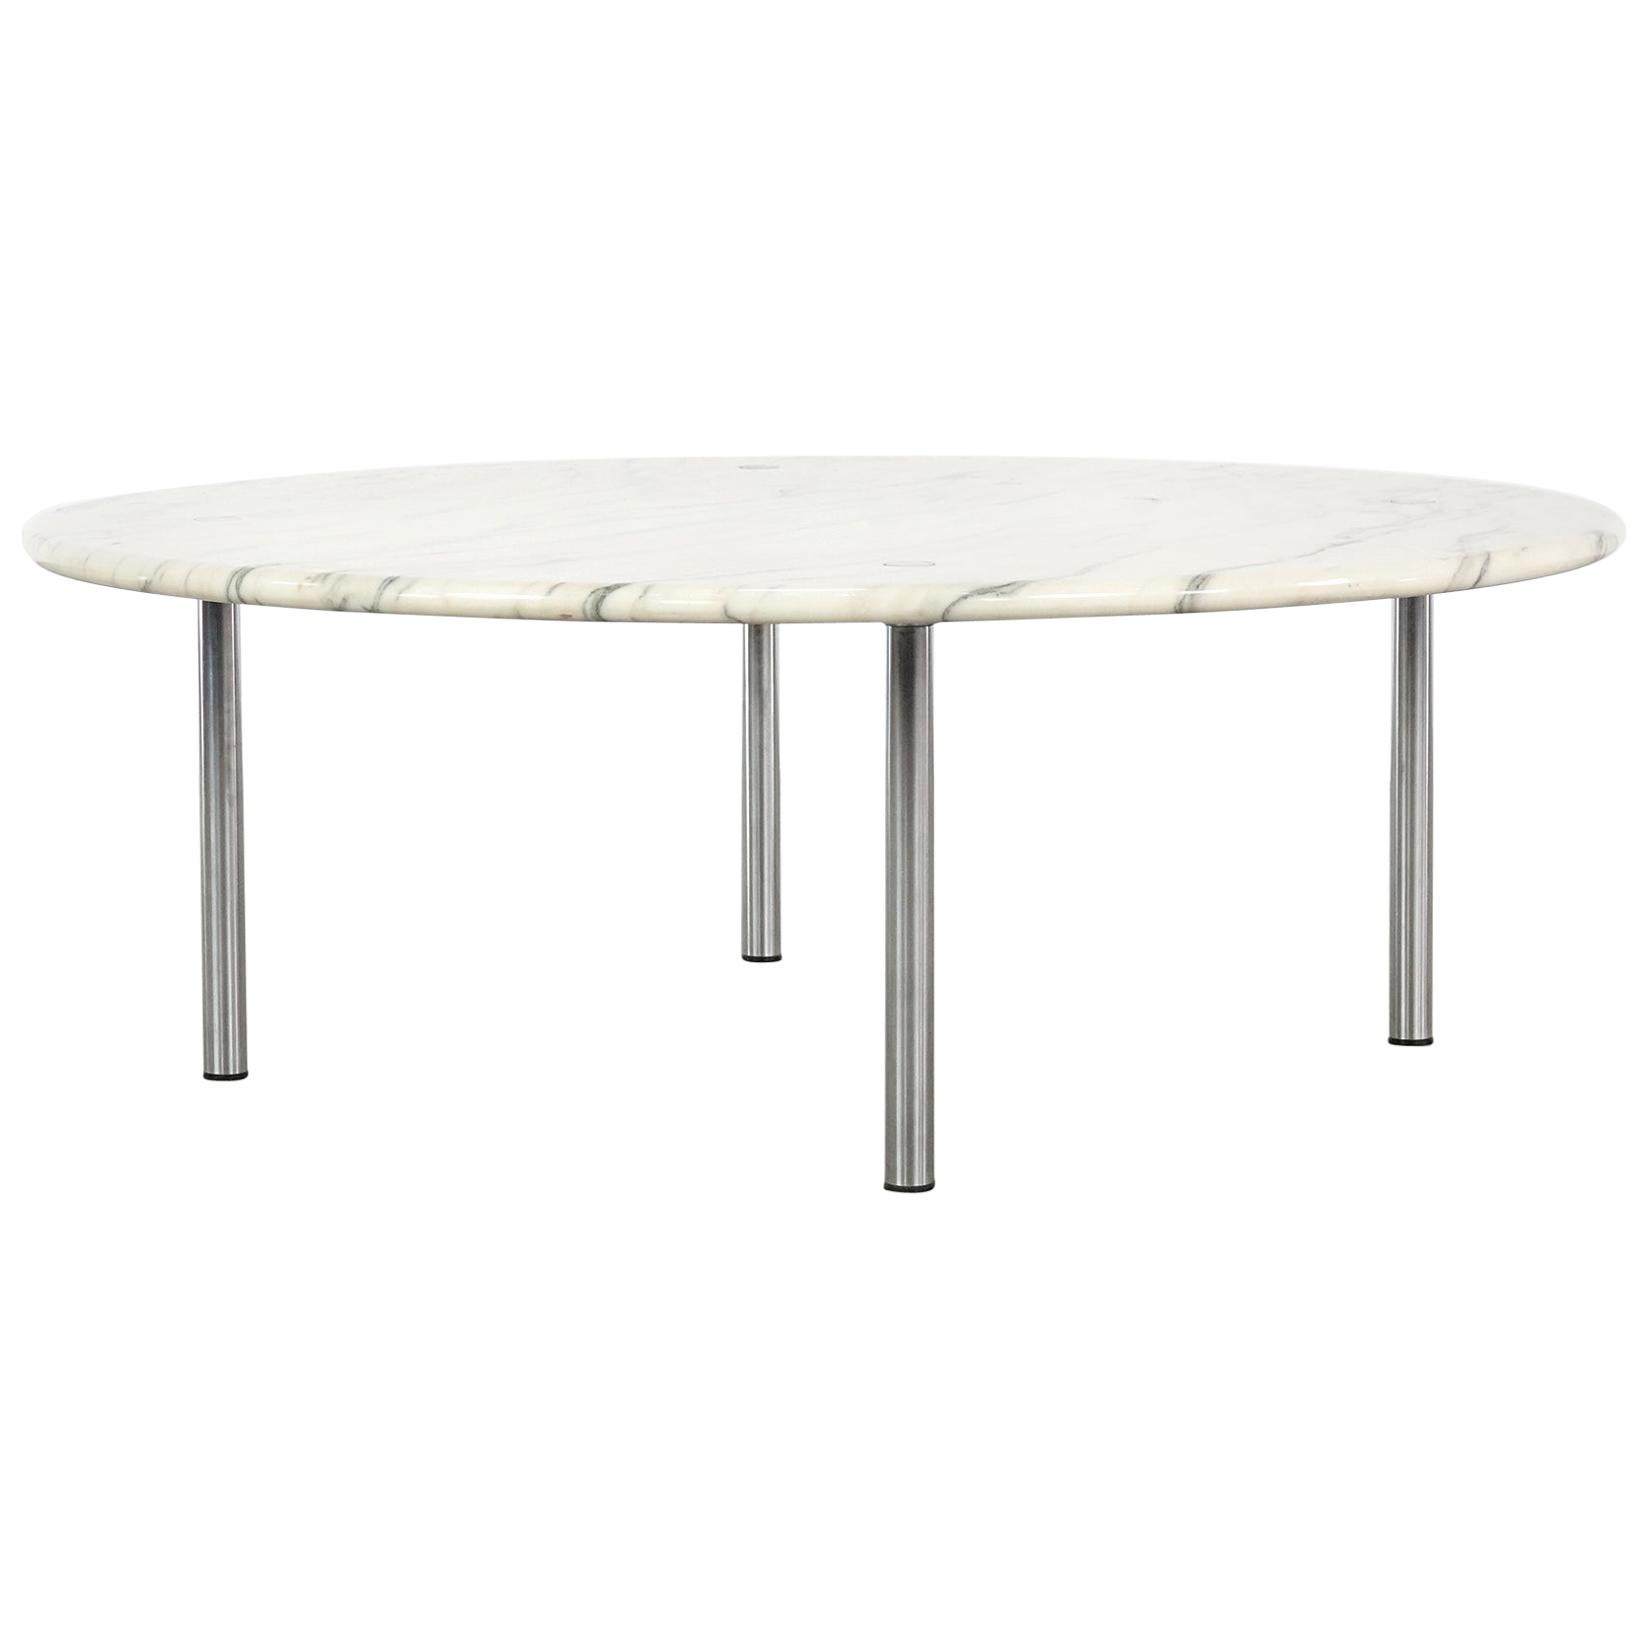 Rare Sofa Table with Carrara Marble Top by Erwine & Estelle Laverne for Laverne